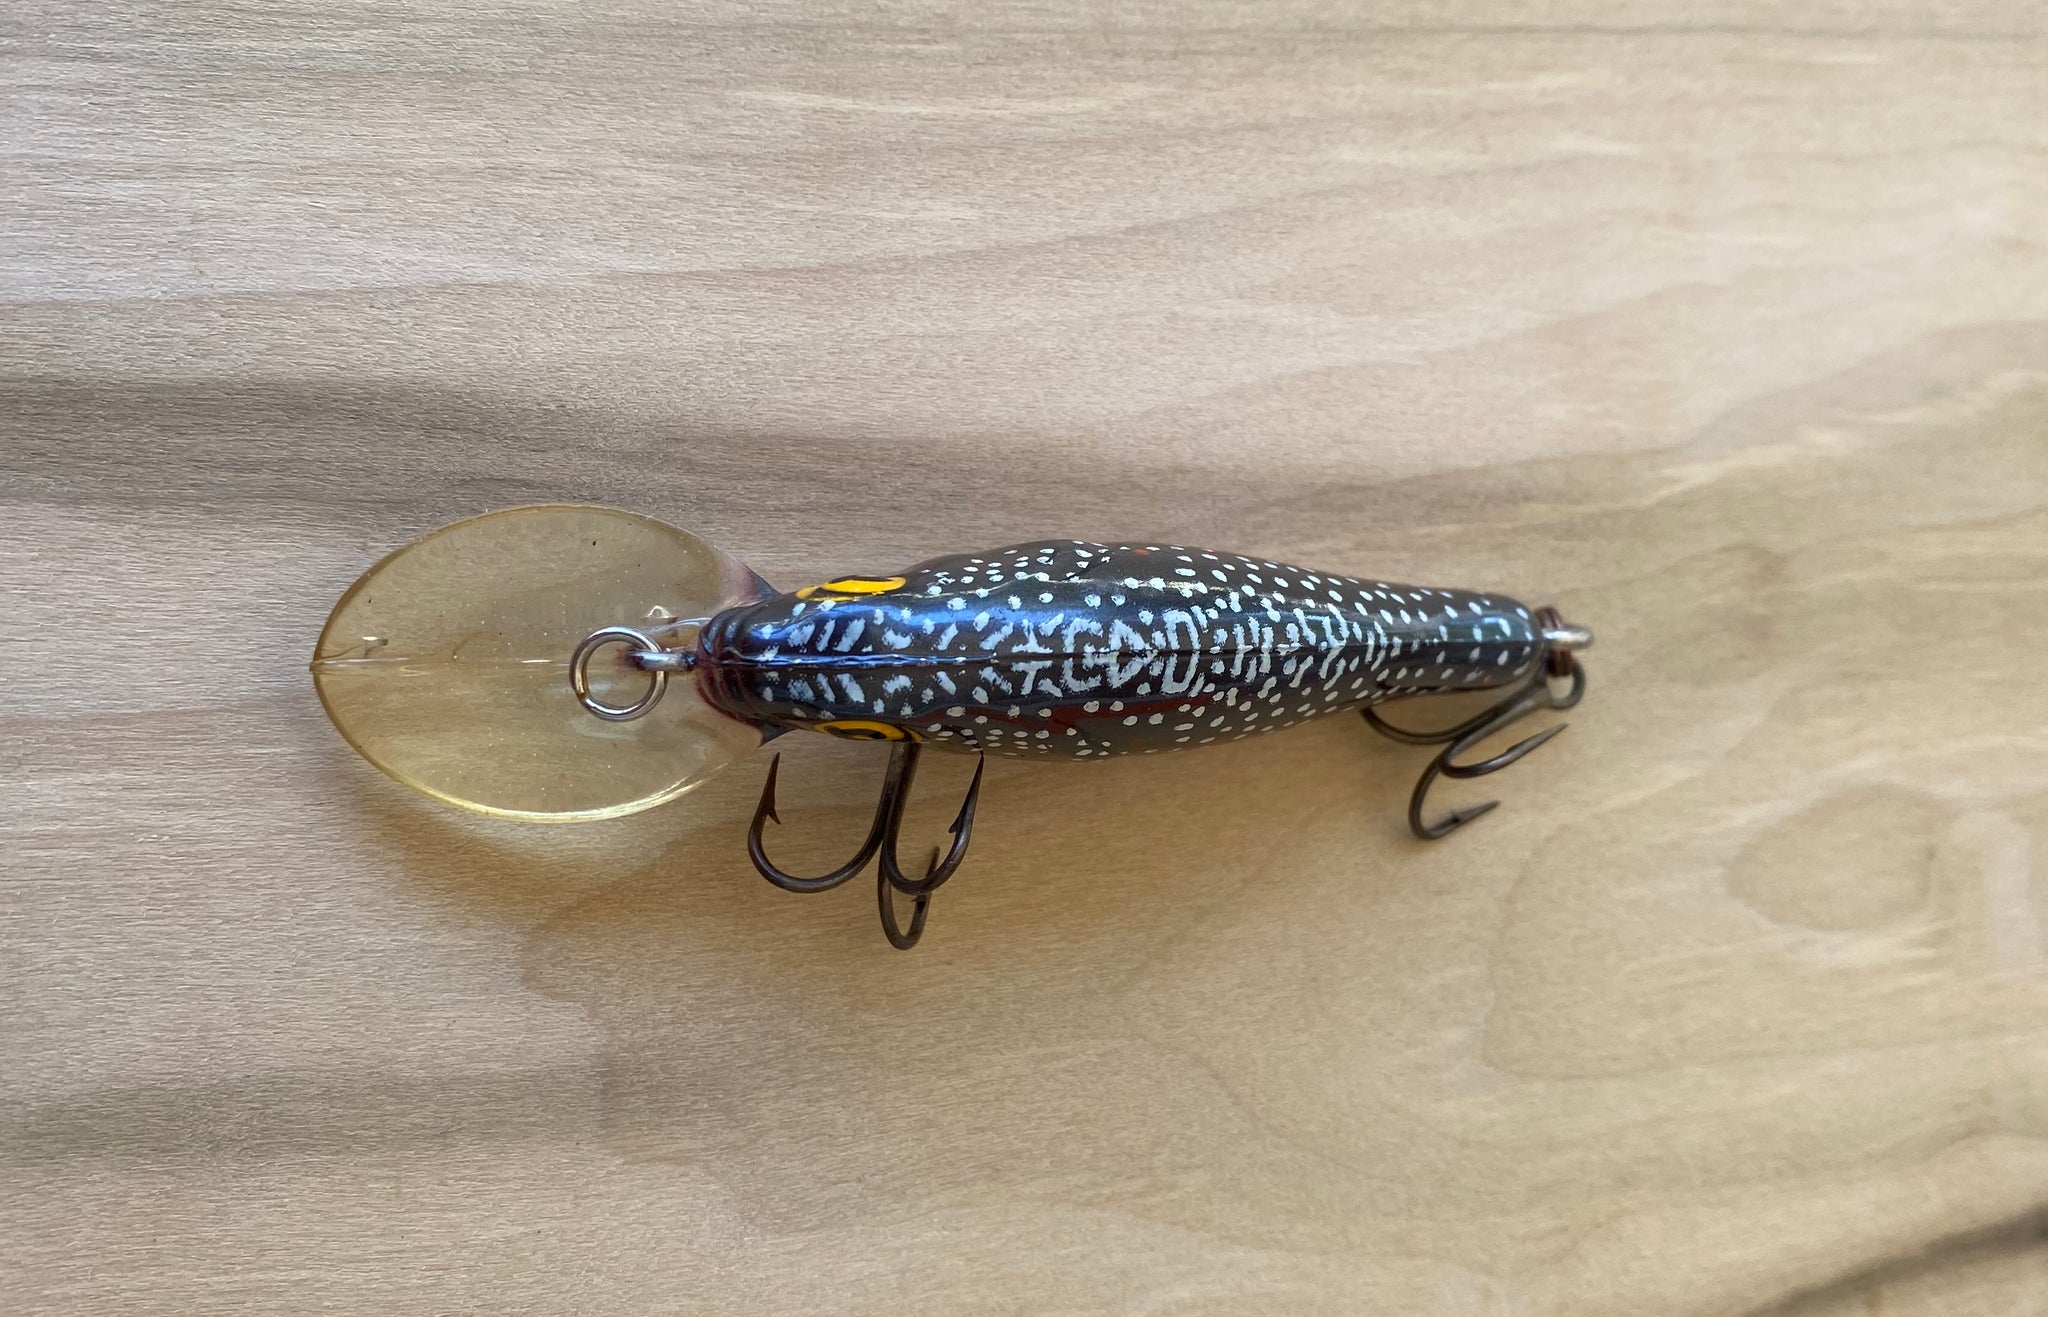 Vintage BOMBER BAIT COMPANY Smilin' Minnow Fishing Lure • BROWN